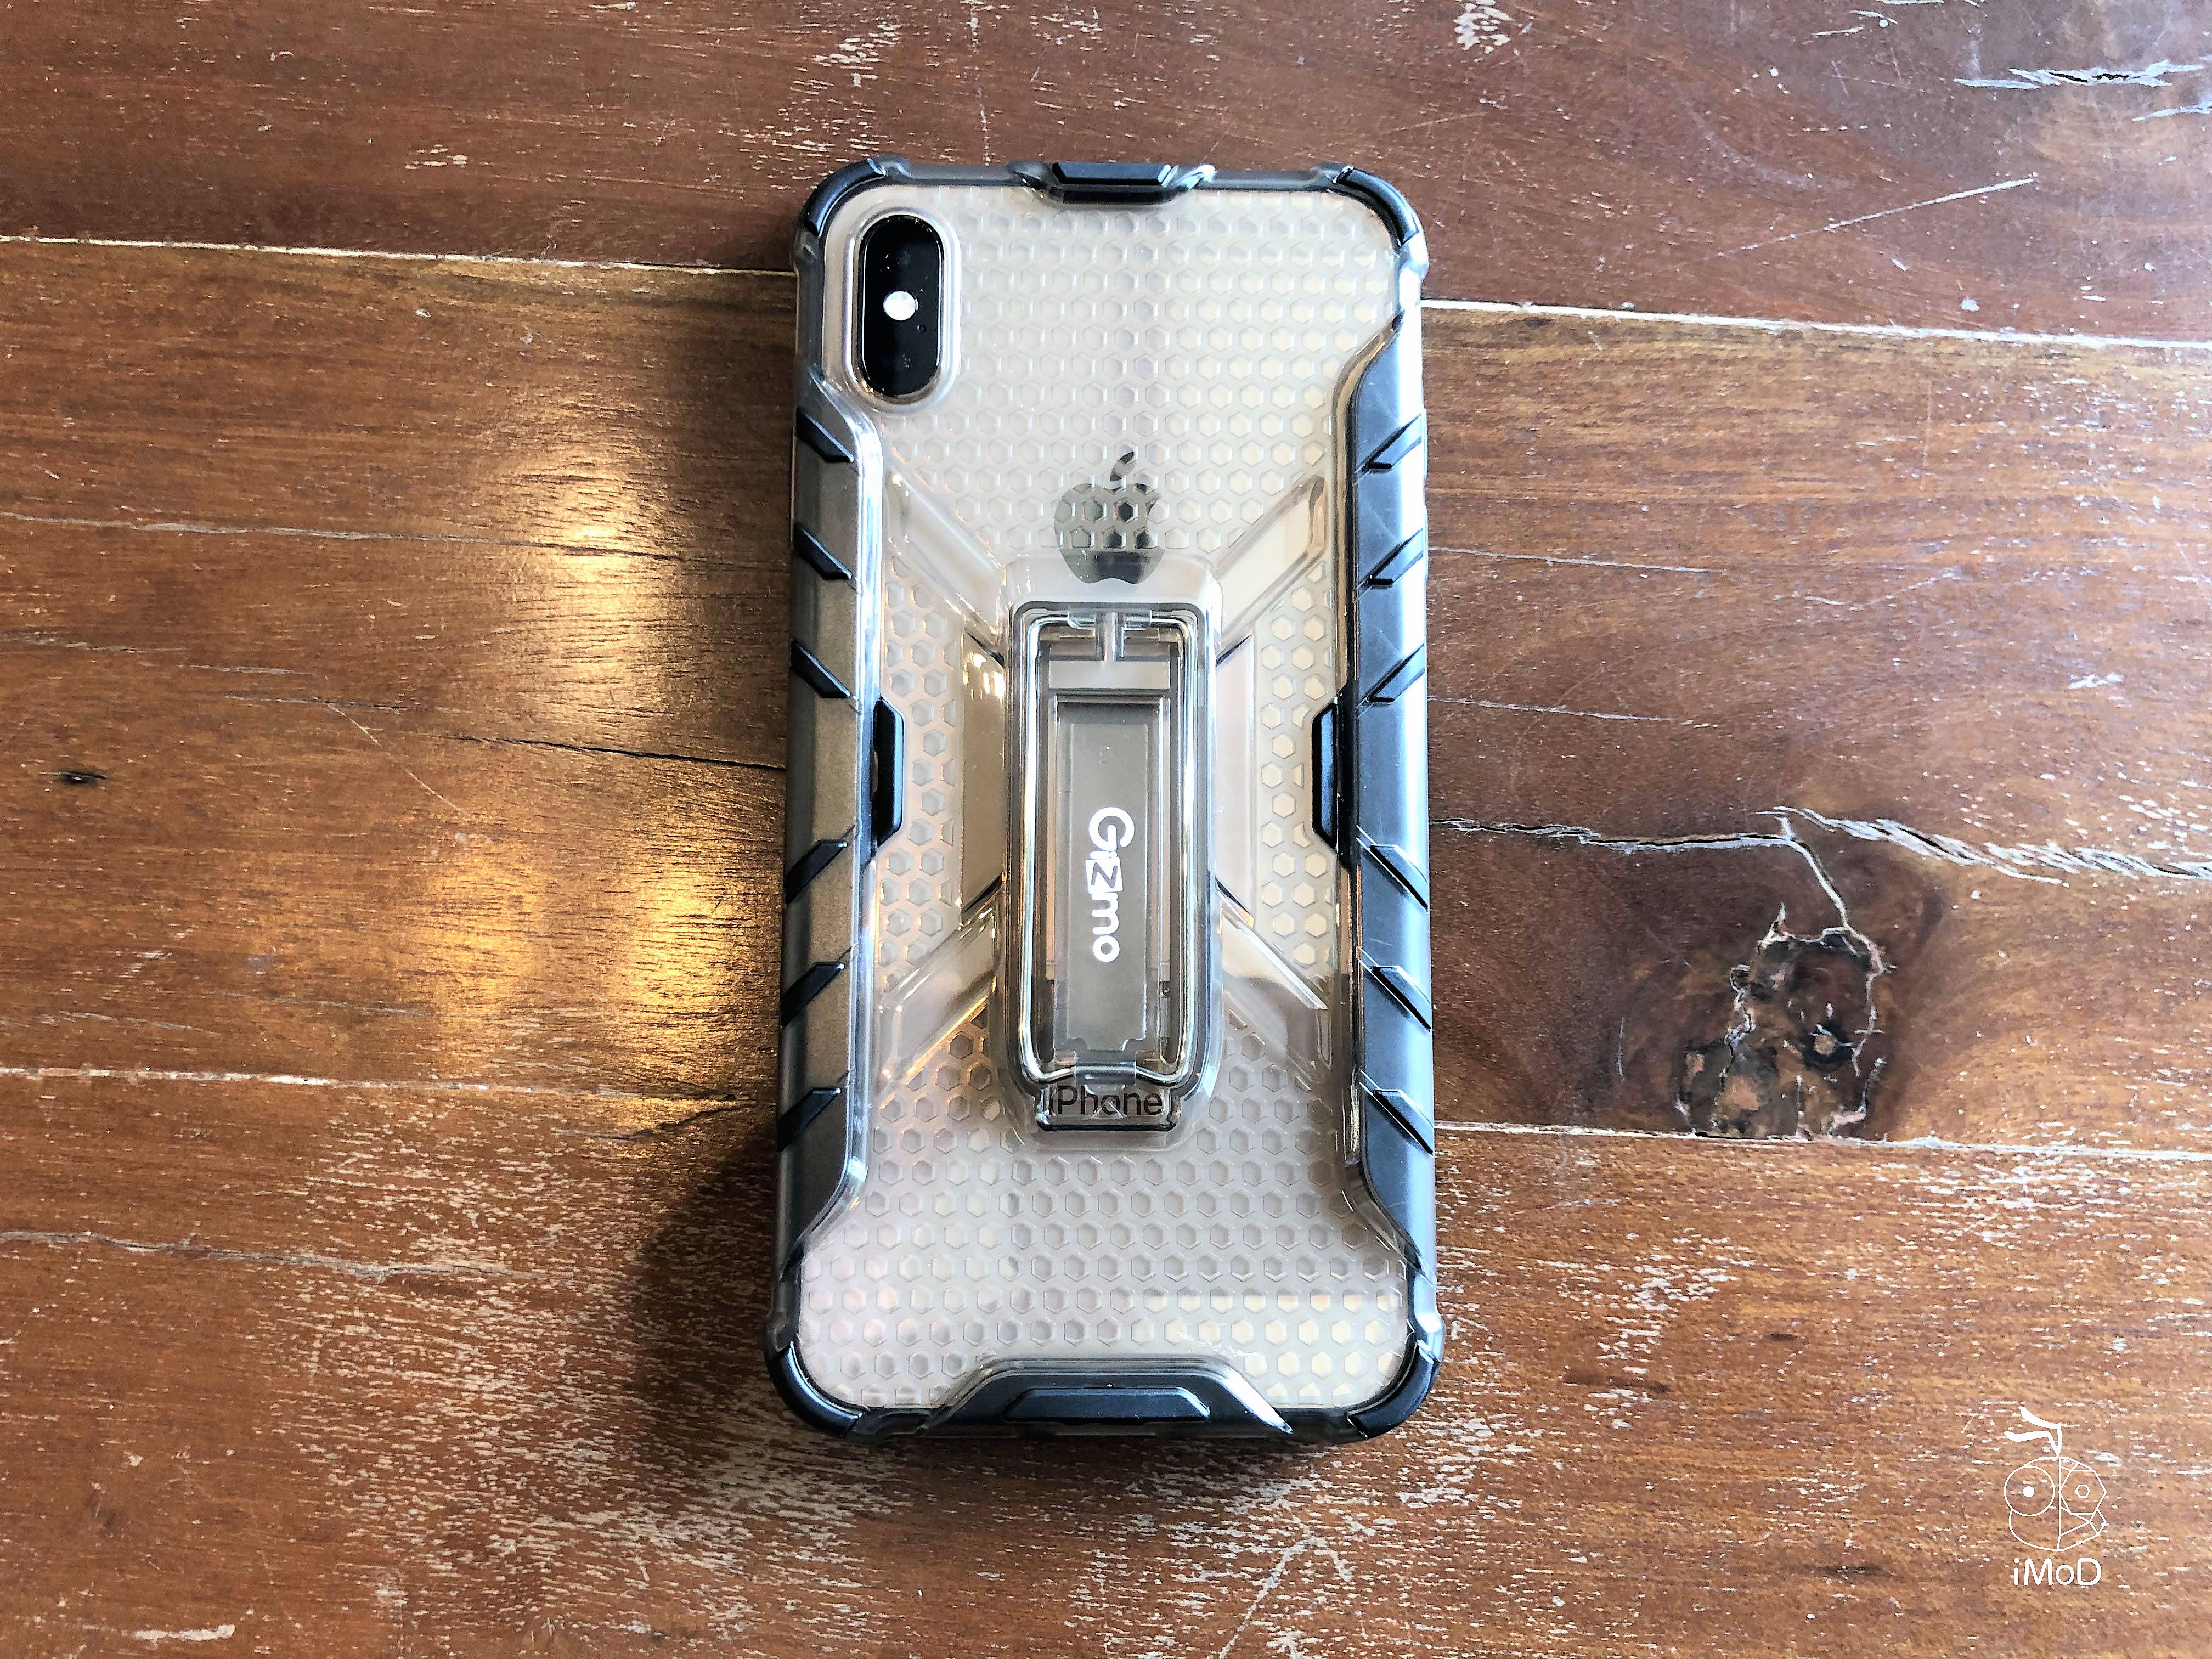 Gizmo 008 Fusion For Iphone Xs Max Review 0050